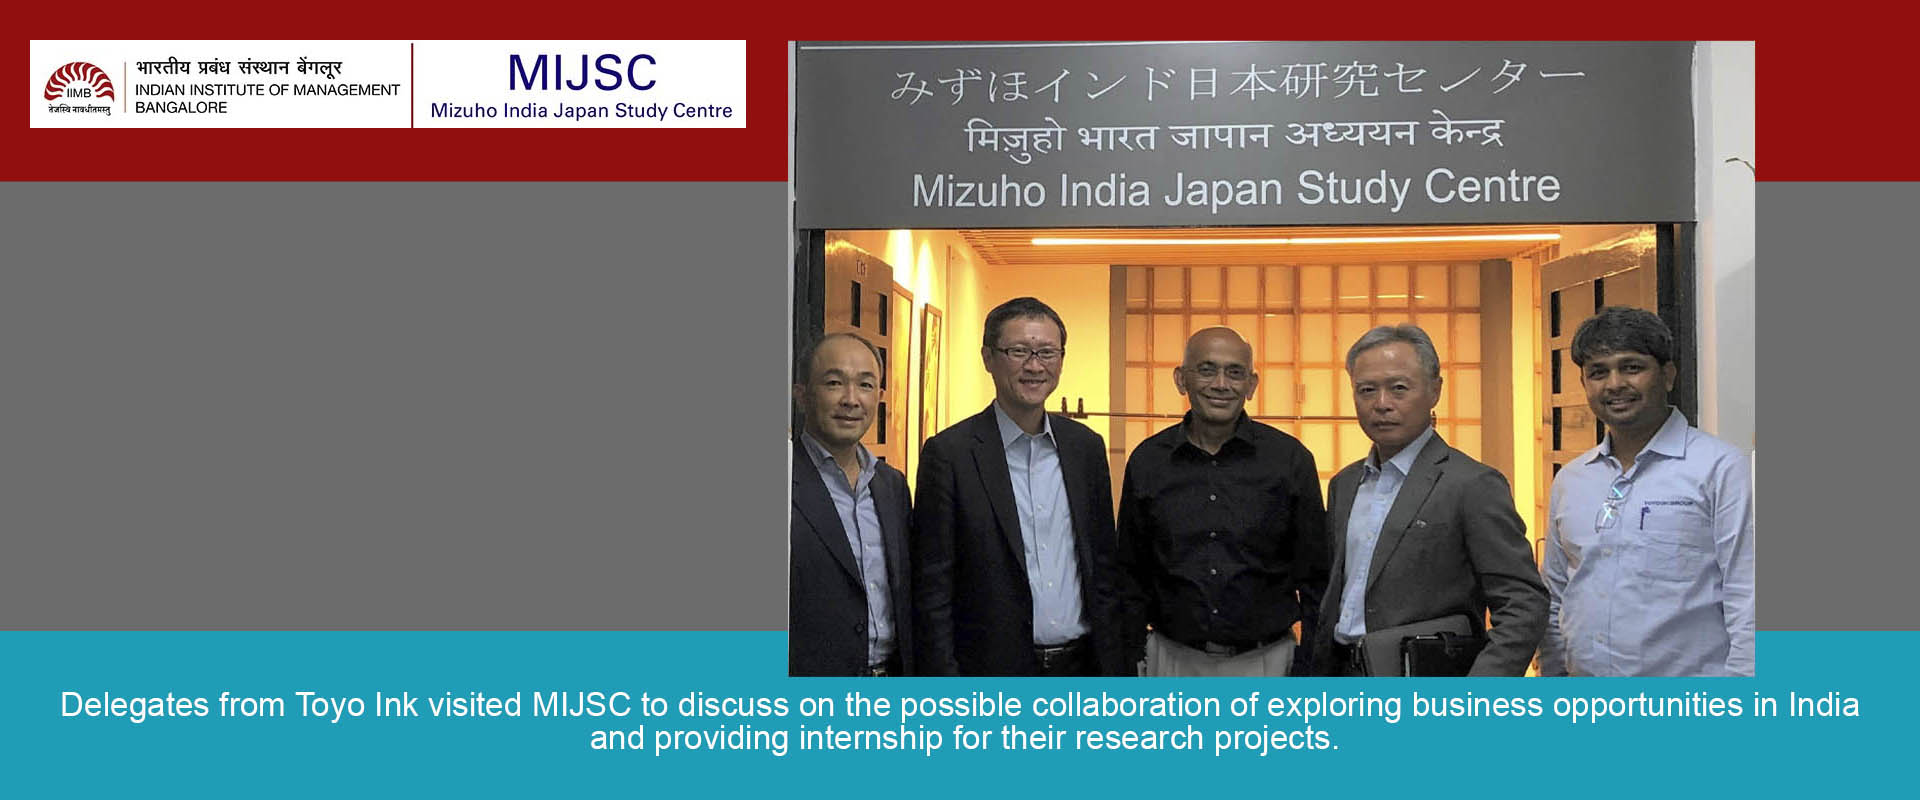 Delegates from Toyo Ink visited MIJSC to discuss on the possible collaboration of exploring business opportunities in India and providing internship for their research projects.